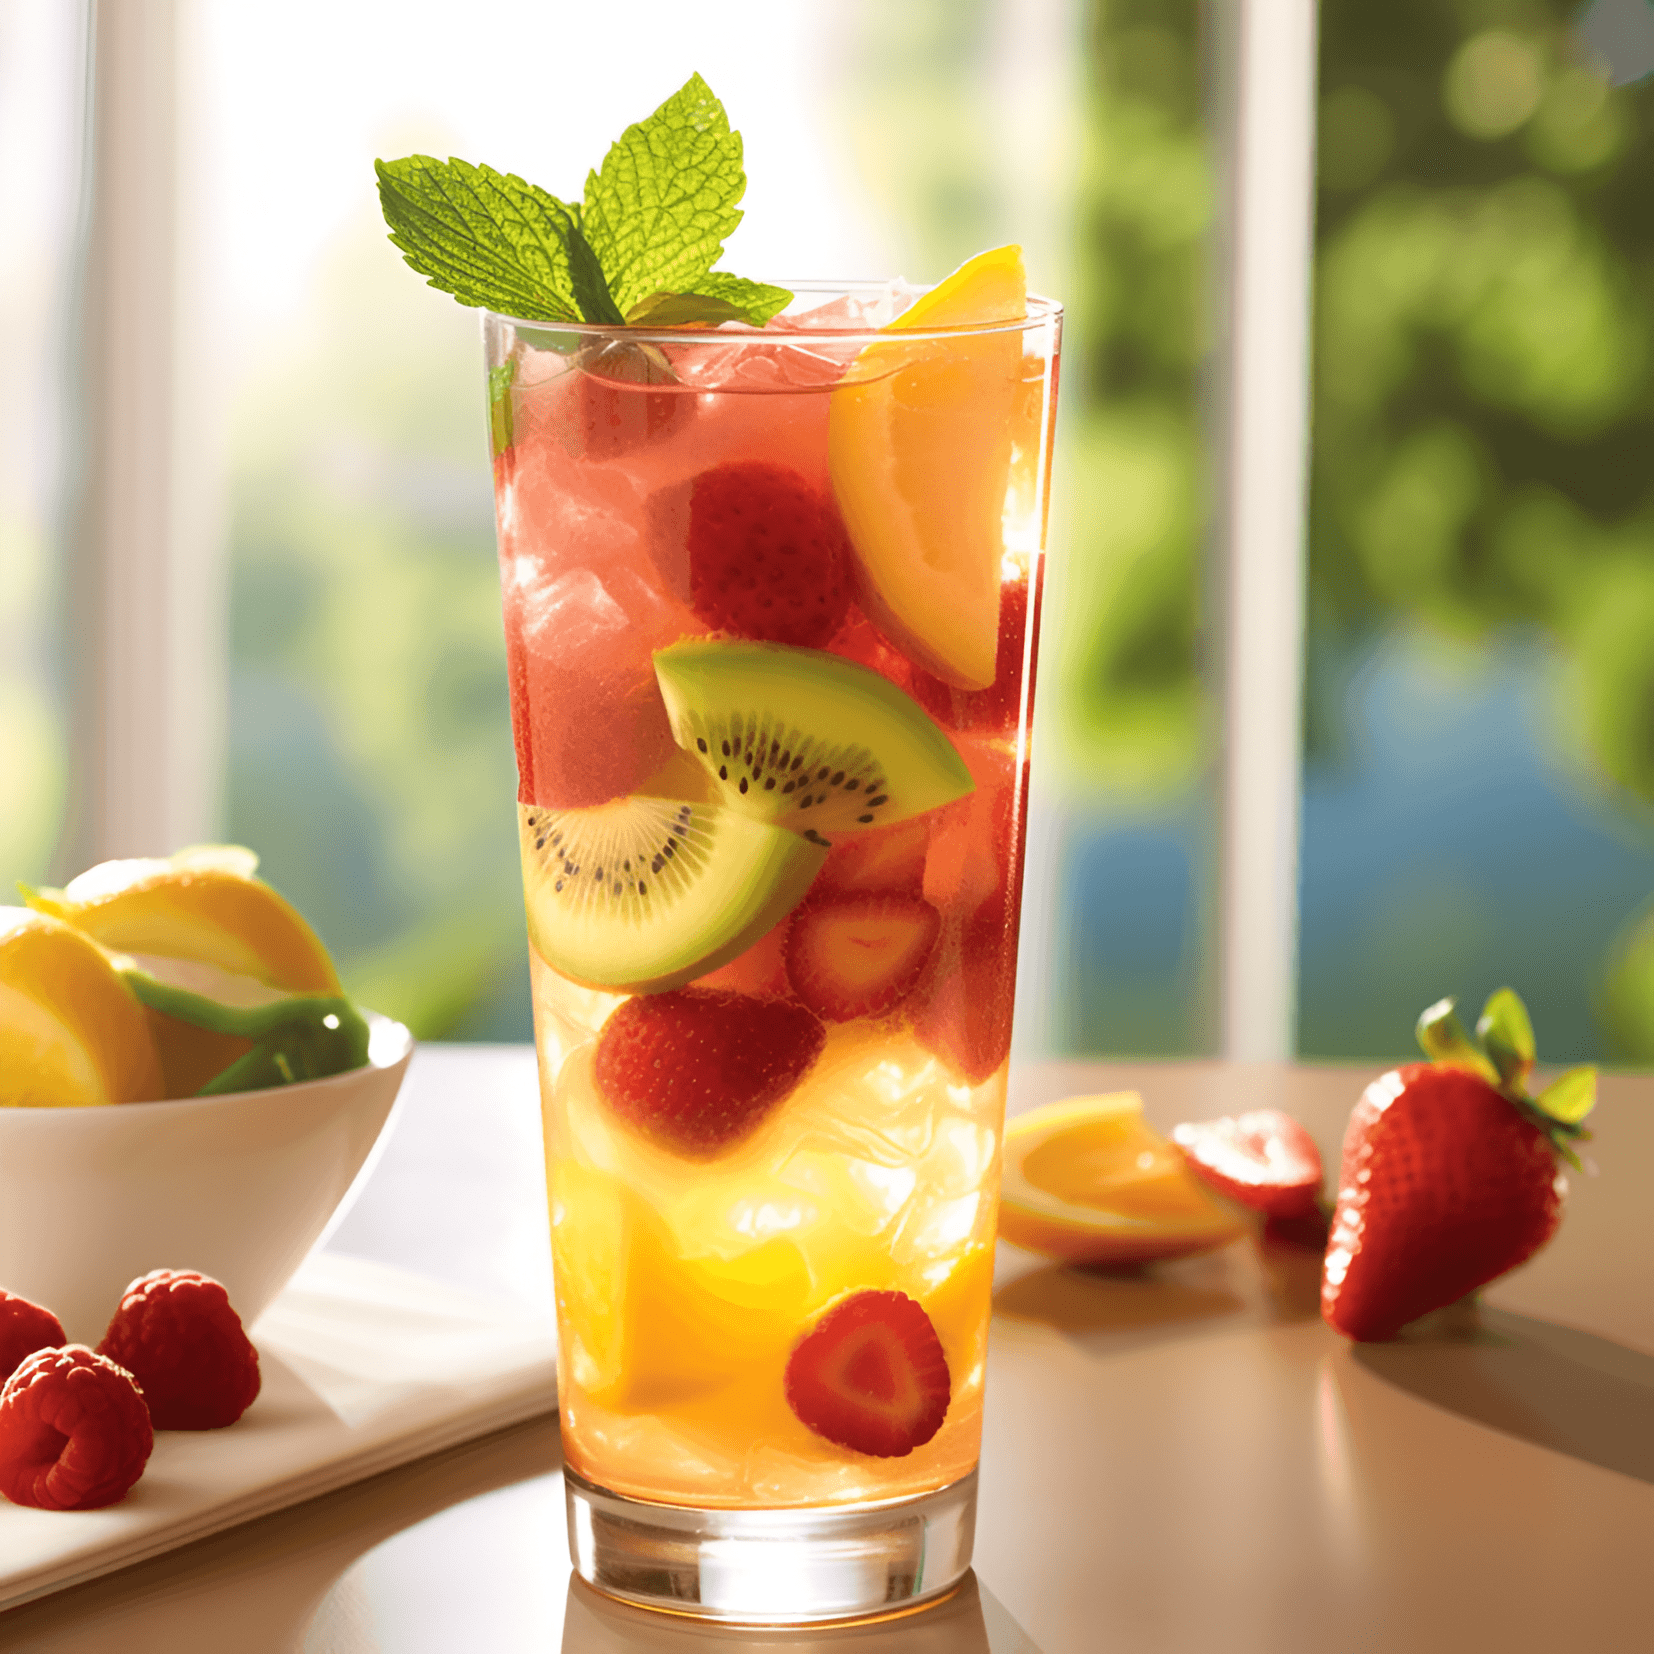 Fruit Cup Cocktail Recipe - The Fruit Cup cocktail is a delightful mix of sweet, tangy, and refreshing flavors. The combination of fresh fruits, citrus, and a touch of mint creates a light and invigorating taste that is perfect for warm weather.